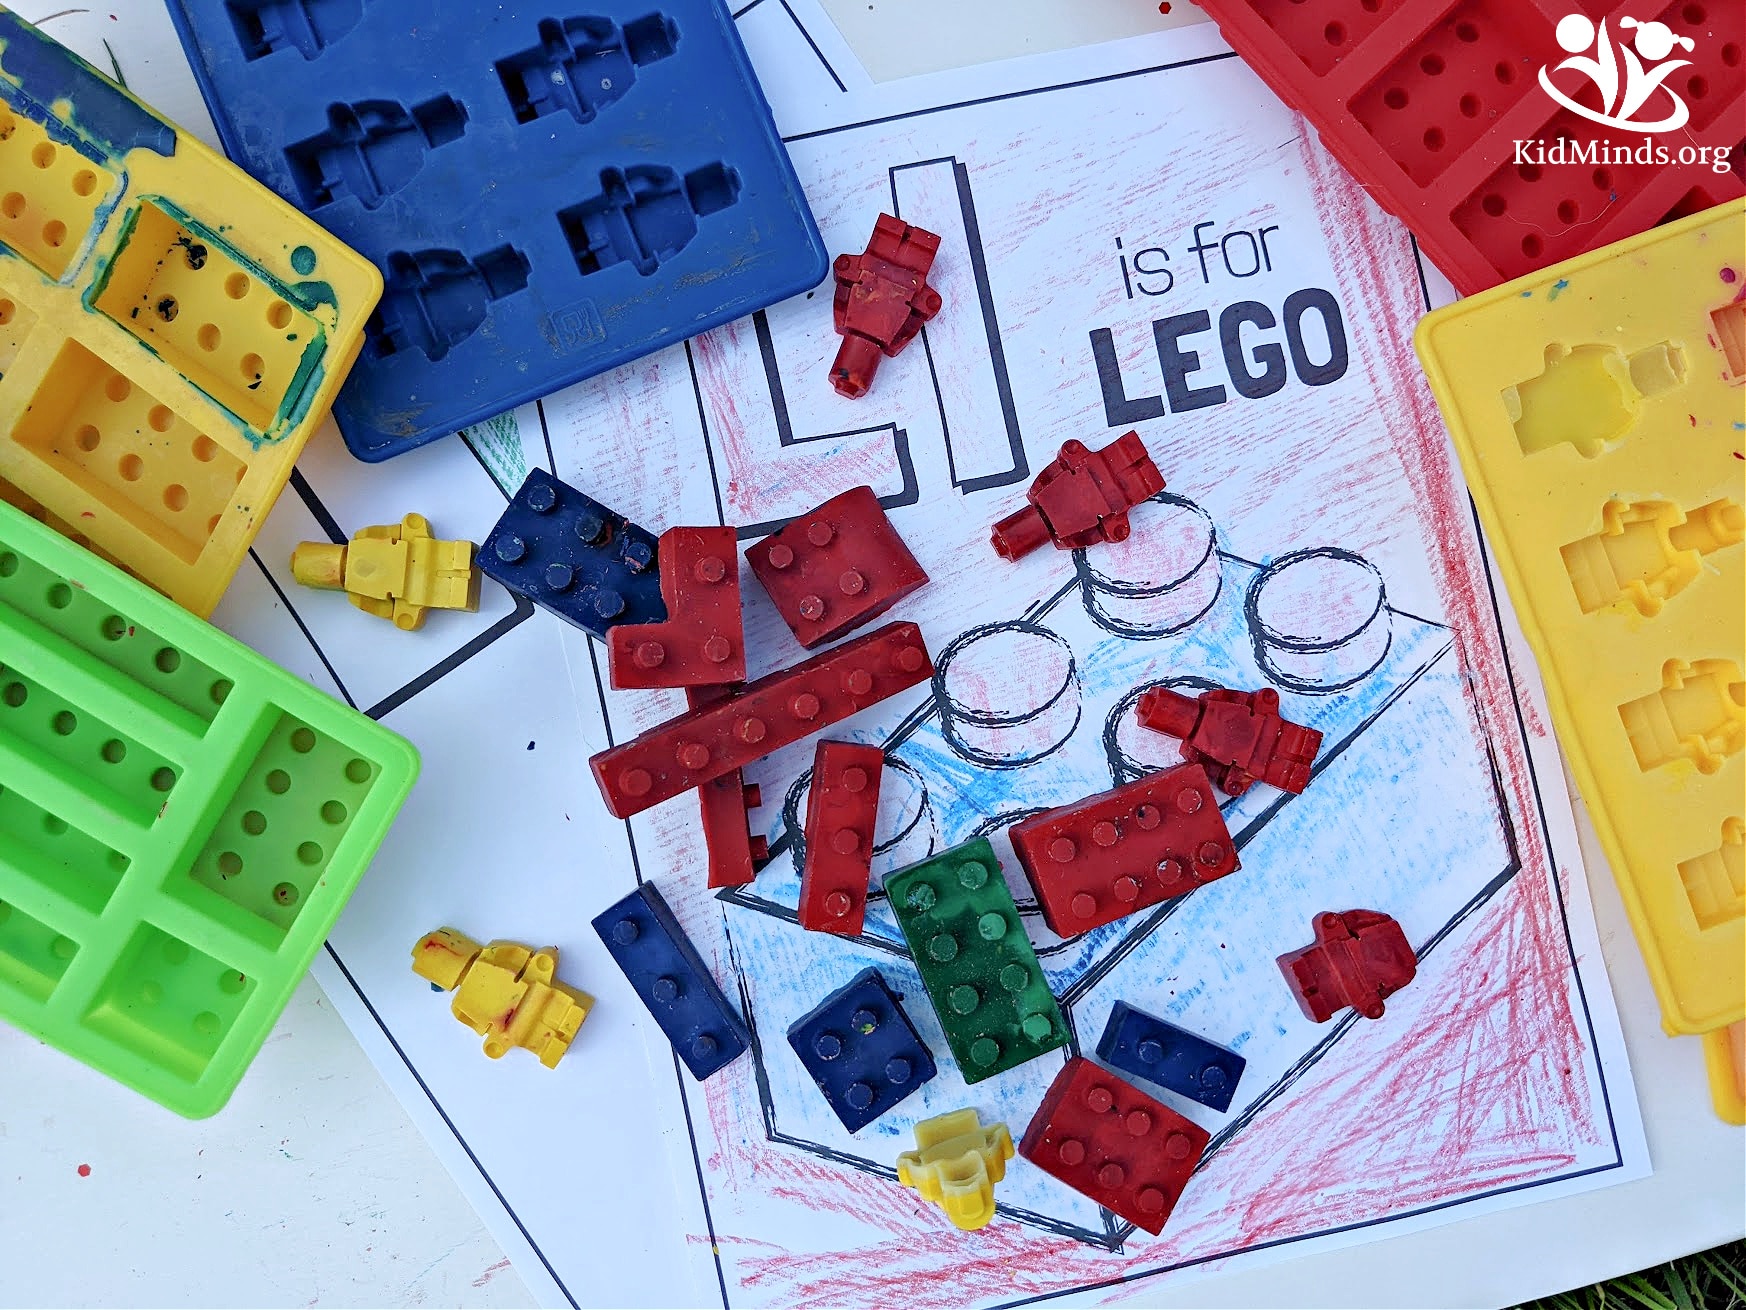 A fool-proof guide to melting old and broken crayons down and turning them into super cool LEGO. #kidsactivities #learning #kidminds #handsonlearning #learningisfun #funscience #crayons #laughingkidslearn #homeschooling #familyfun #LEGO